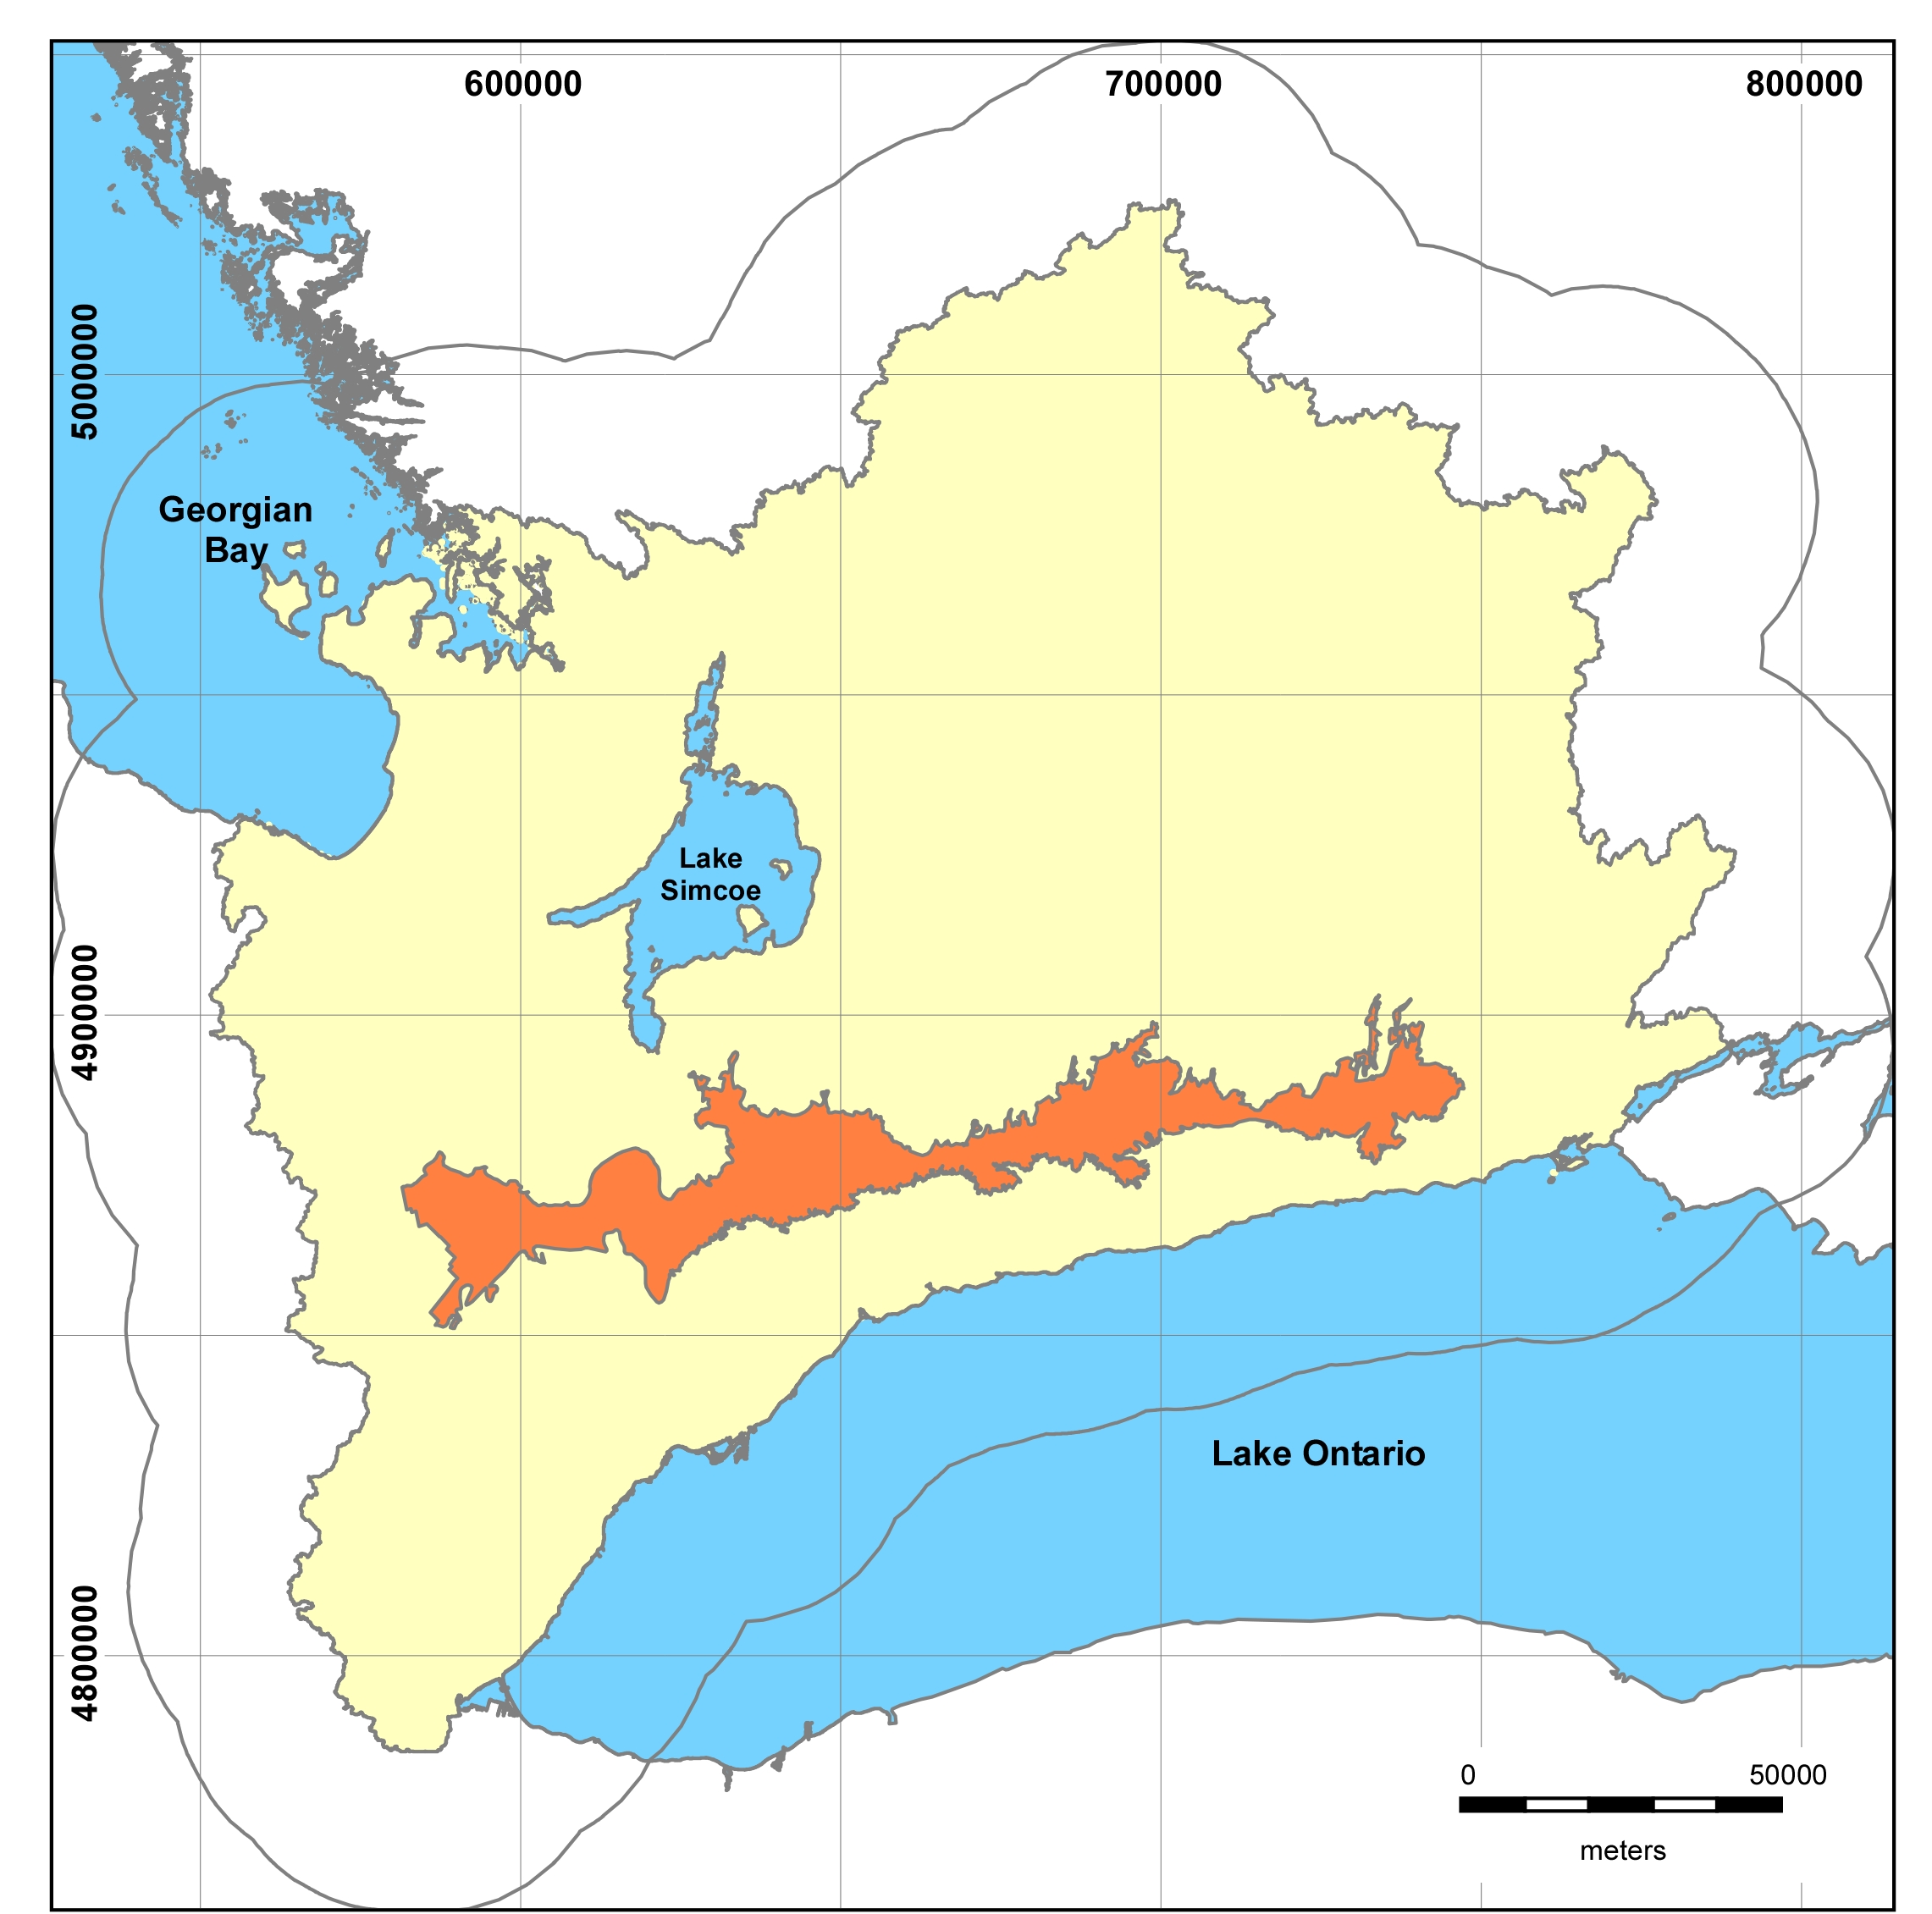 *Figure 1.1.1 Oak Ridges Moraine Groundwater Management Program study area
displayed with a 25km boundary buffer; the Oak Ridges Moraine is also
shown.*